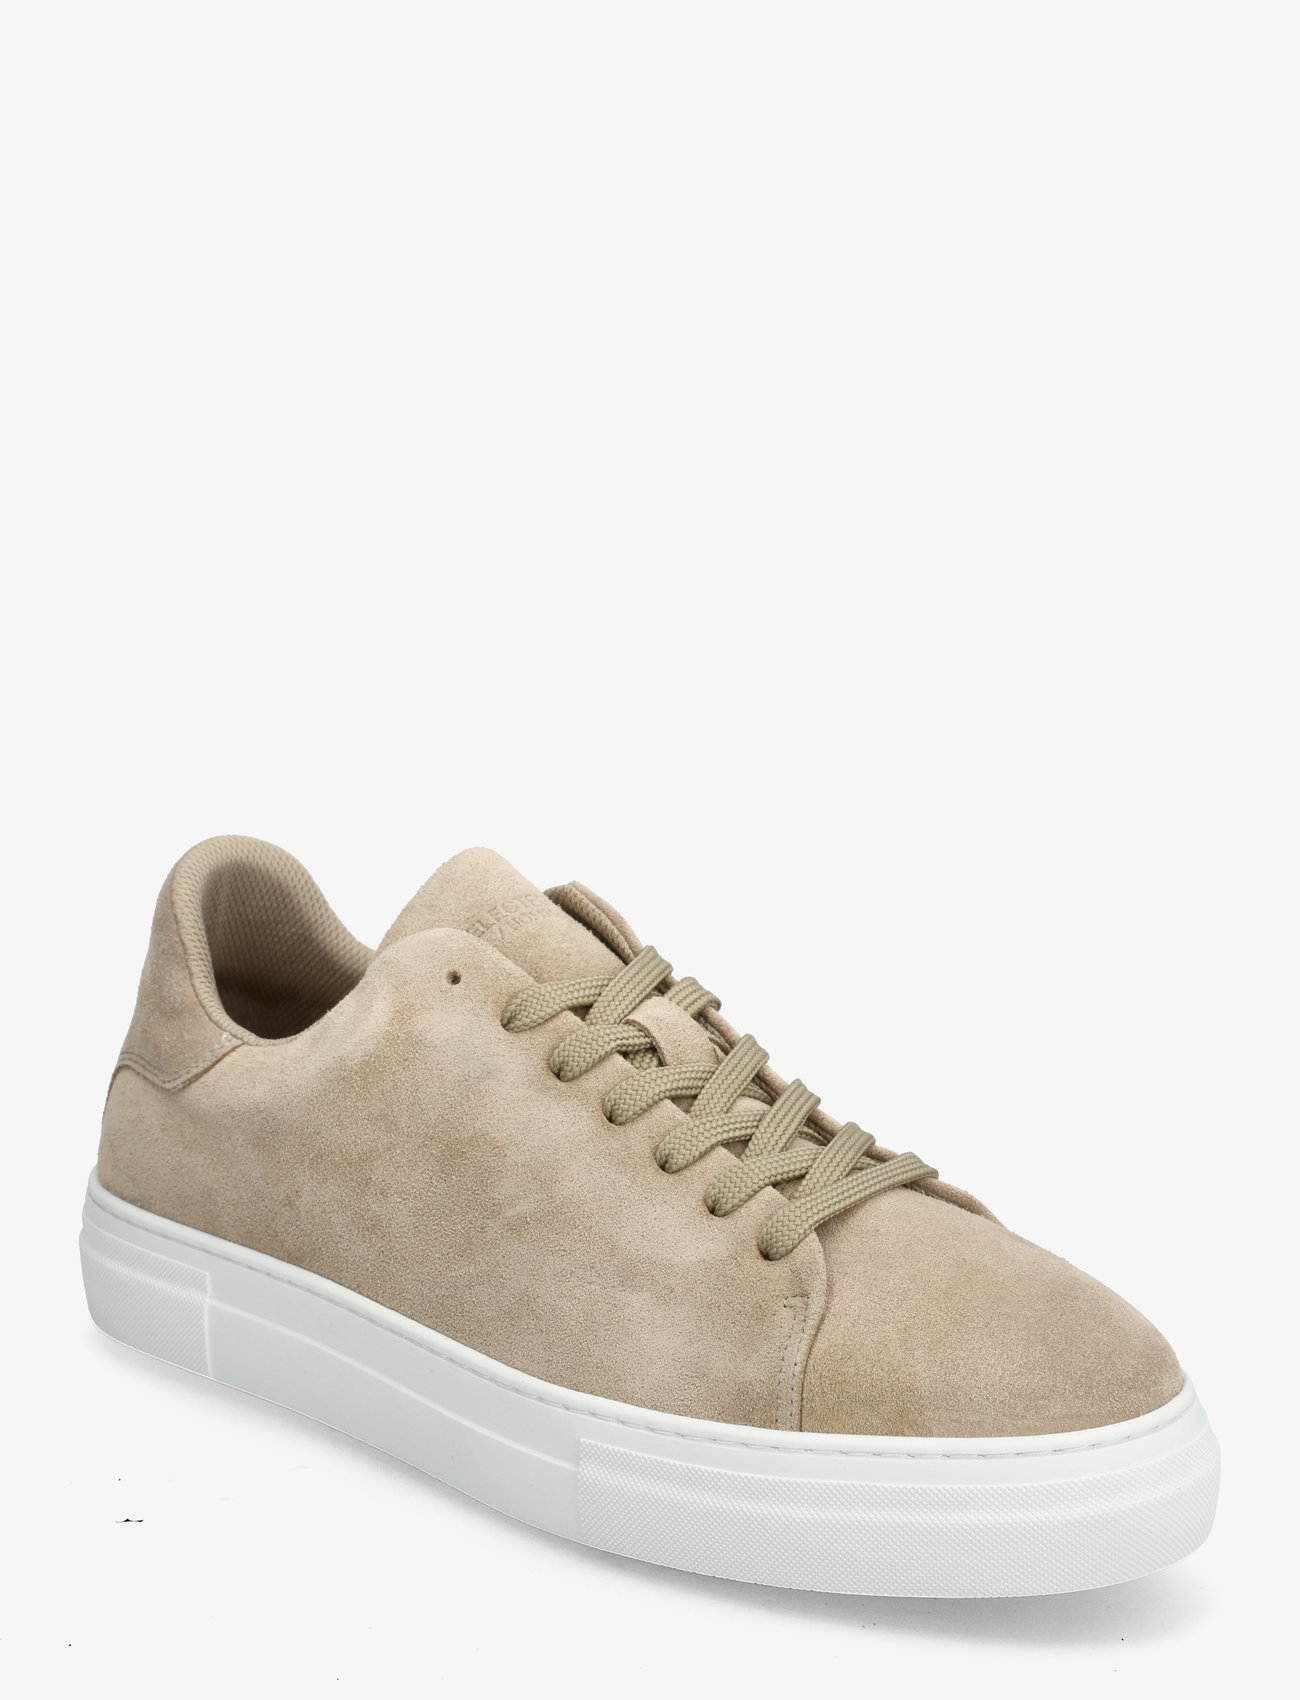 Selected Homme - SLHDAVID CHUNKY CLEAN SUEDE TRAINER B - low tops - sand - 0